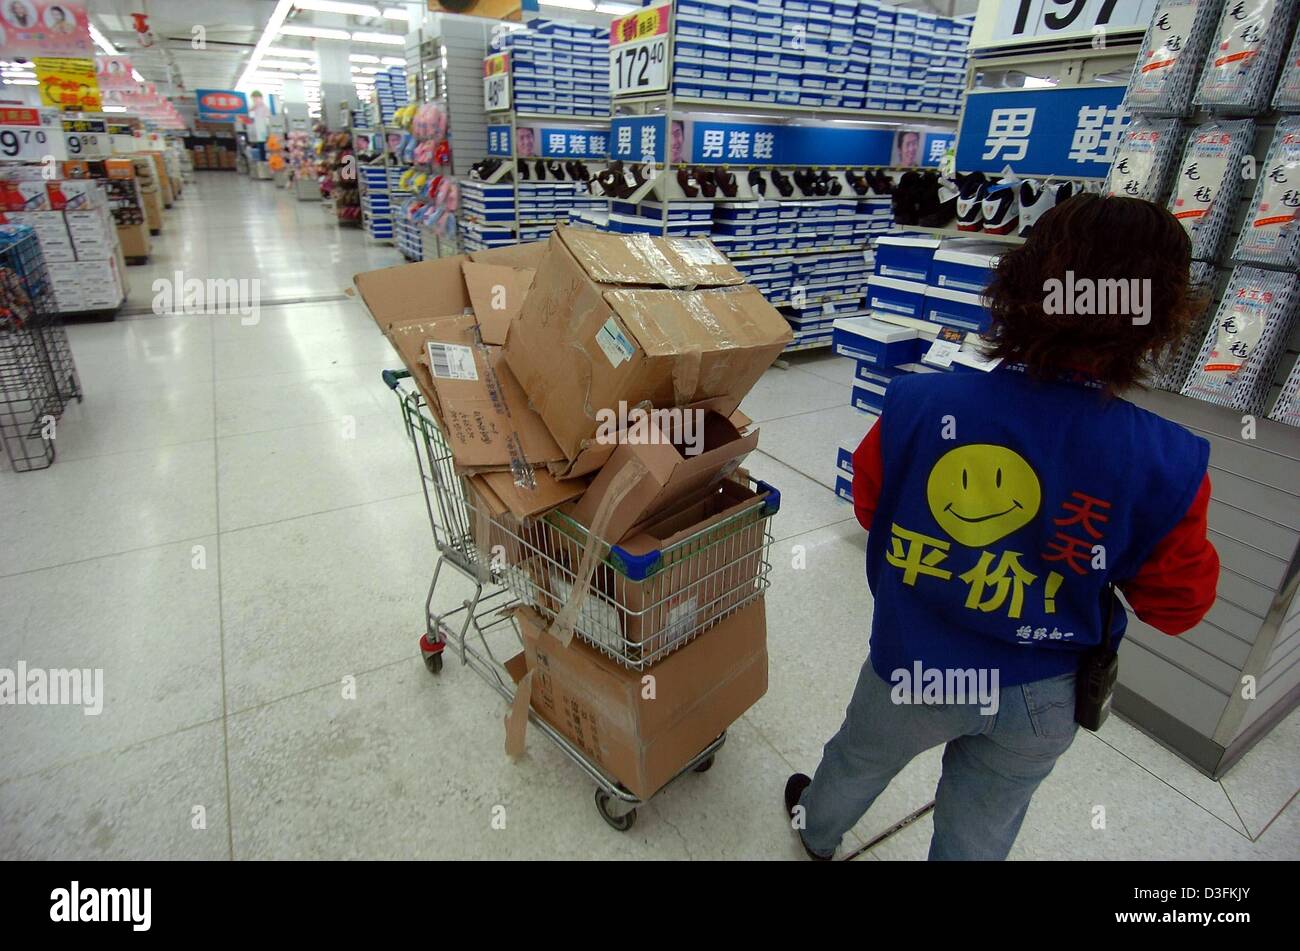 (dpa) - An employee of the Wall Mart supermarket chain fills the shelves in Changchun, China, 7 December 2004. Stock Photo